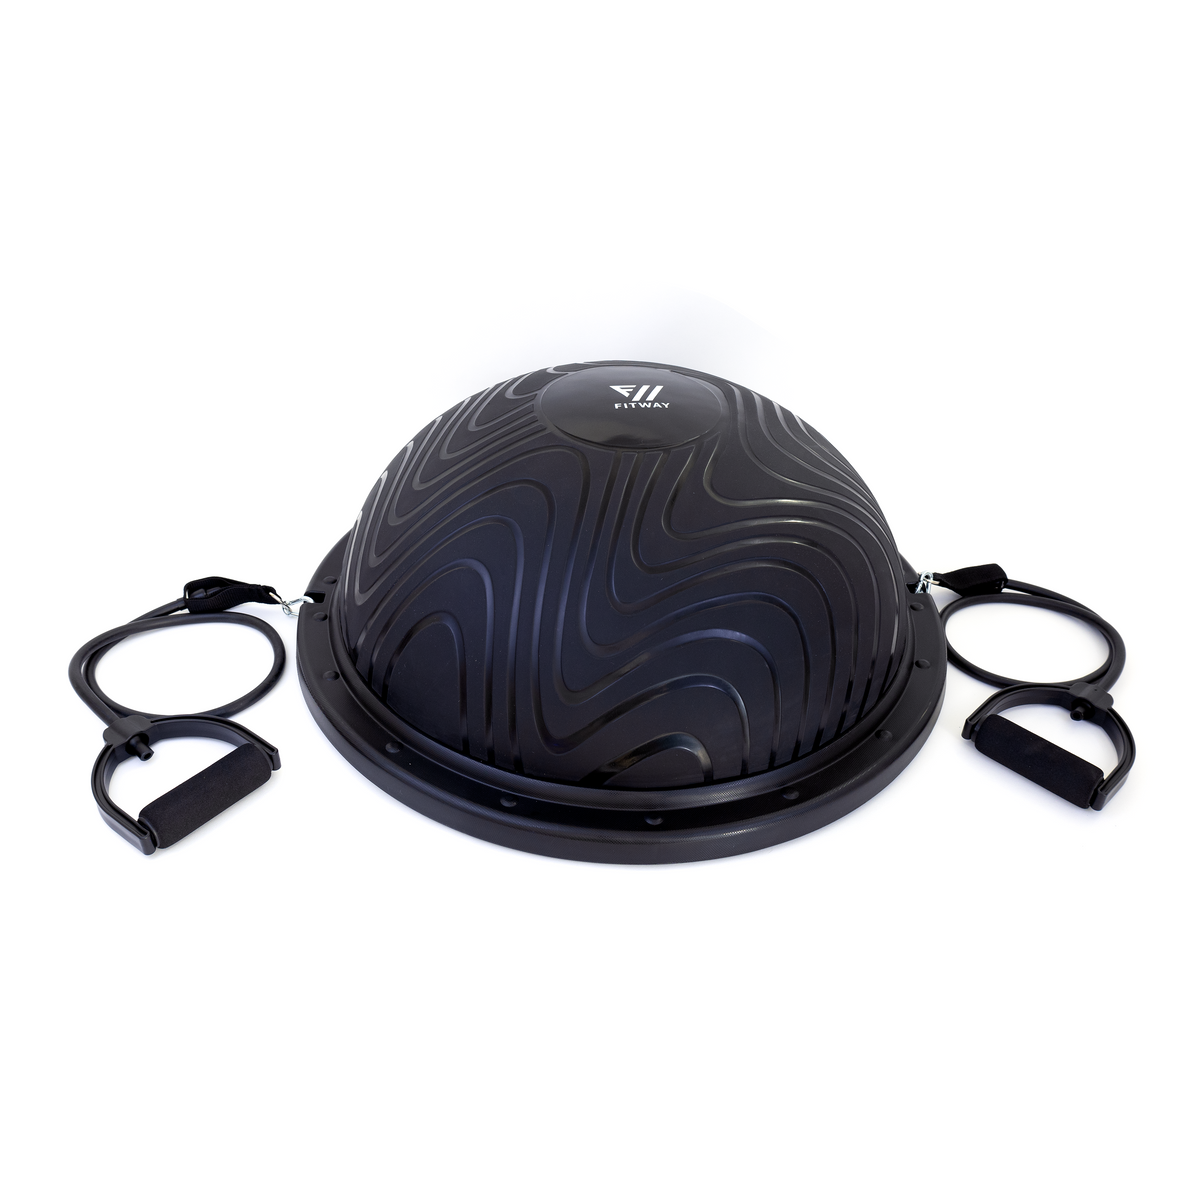 FitWay Equip. Dome Balance Ball 